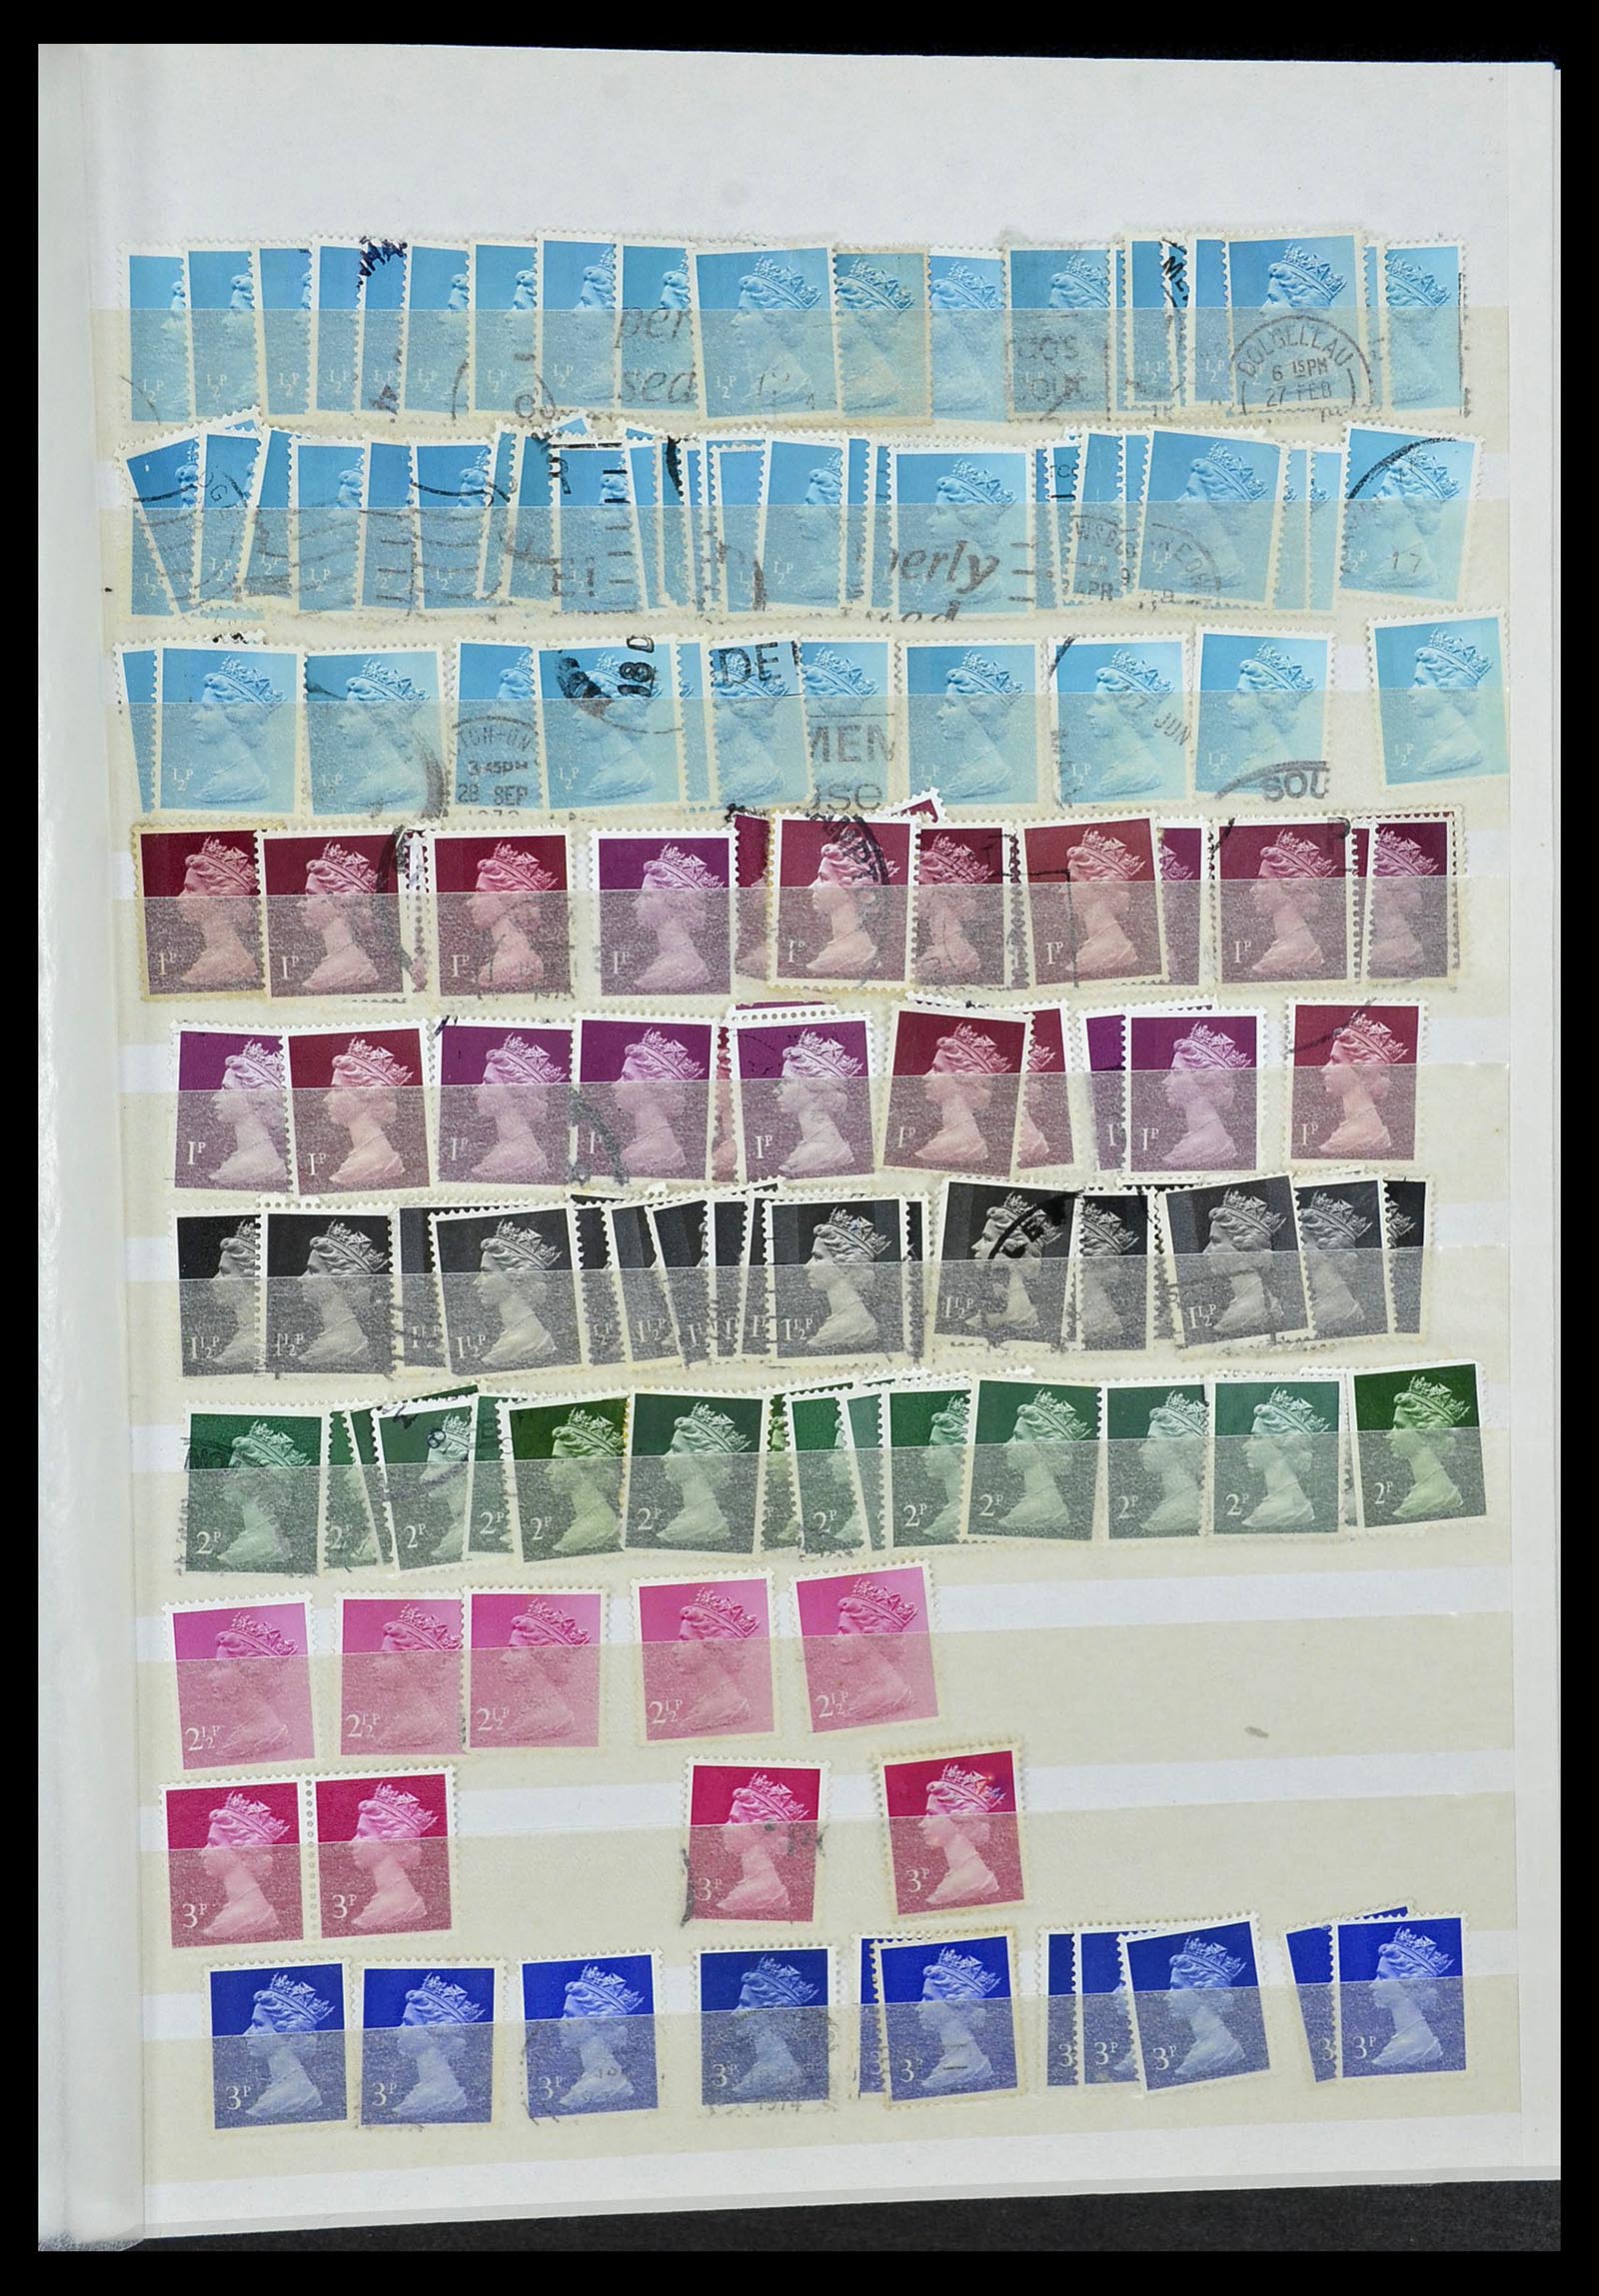 34368 088 - Stamp collection 34368 Great Britain sorting lot 1858-1990.